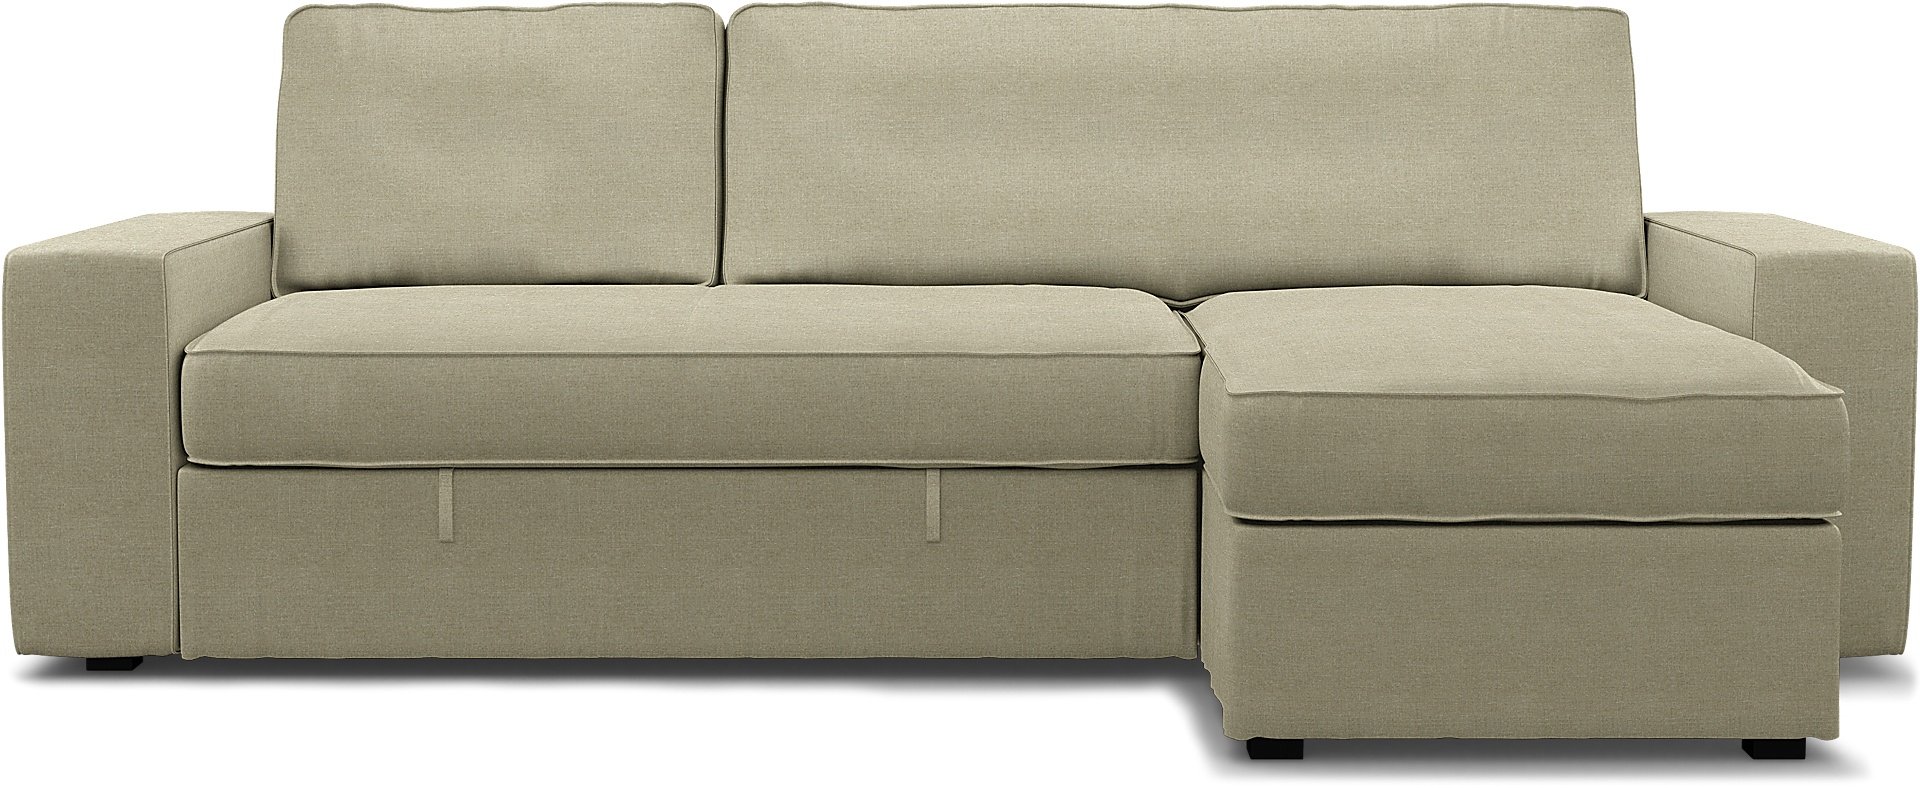 IKEA - Vilasund sofa bed with chaise cover, Pebble, Linen - Bemz